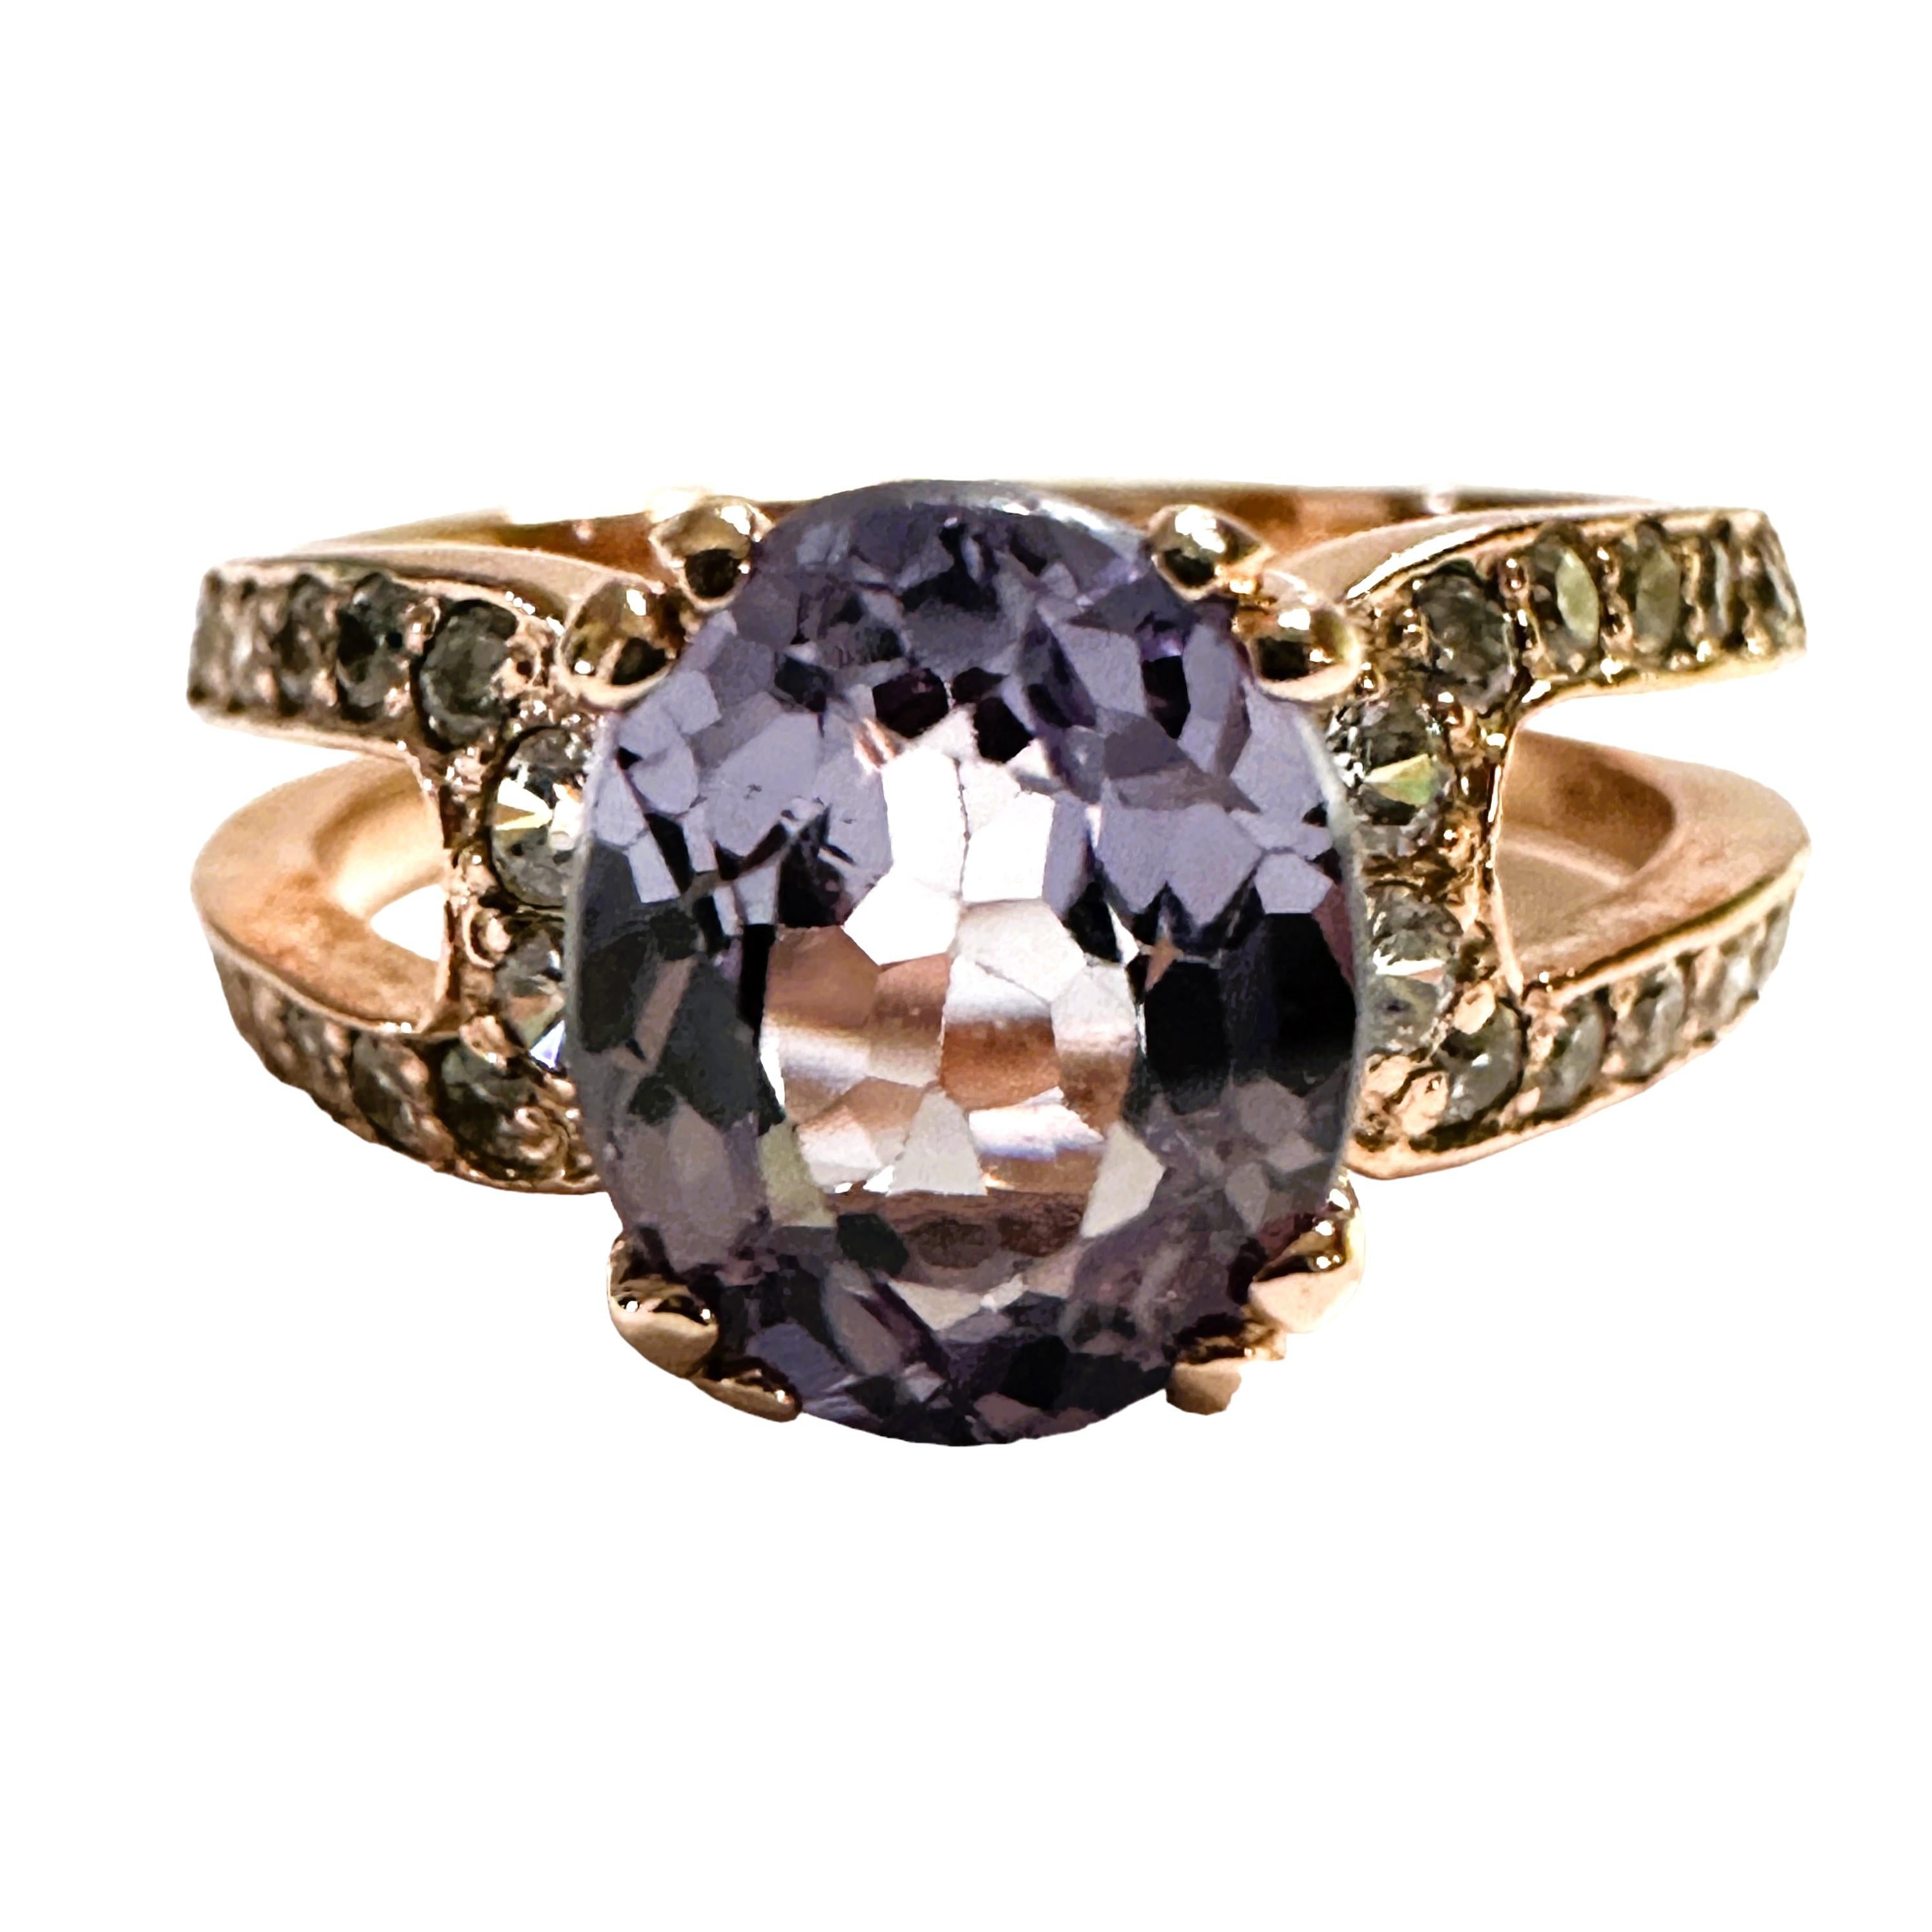 This is just a beautiful gemstone.  The ring is a size 6.5.  It from Africa and is just exquisite.   A very high quality stone. It is a oval cut stone and is 2.10 Cts.   The main stone is 8.7 x 6 mm.   It has a double band that is decorated with